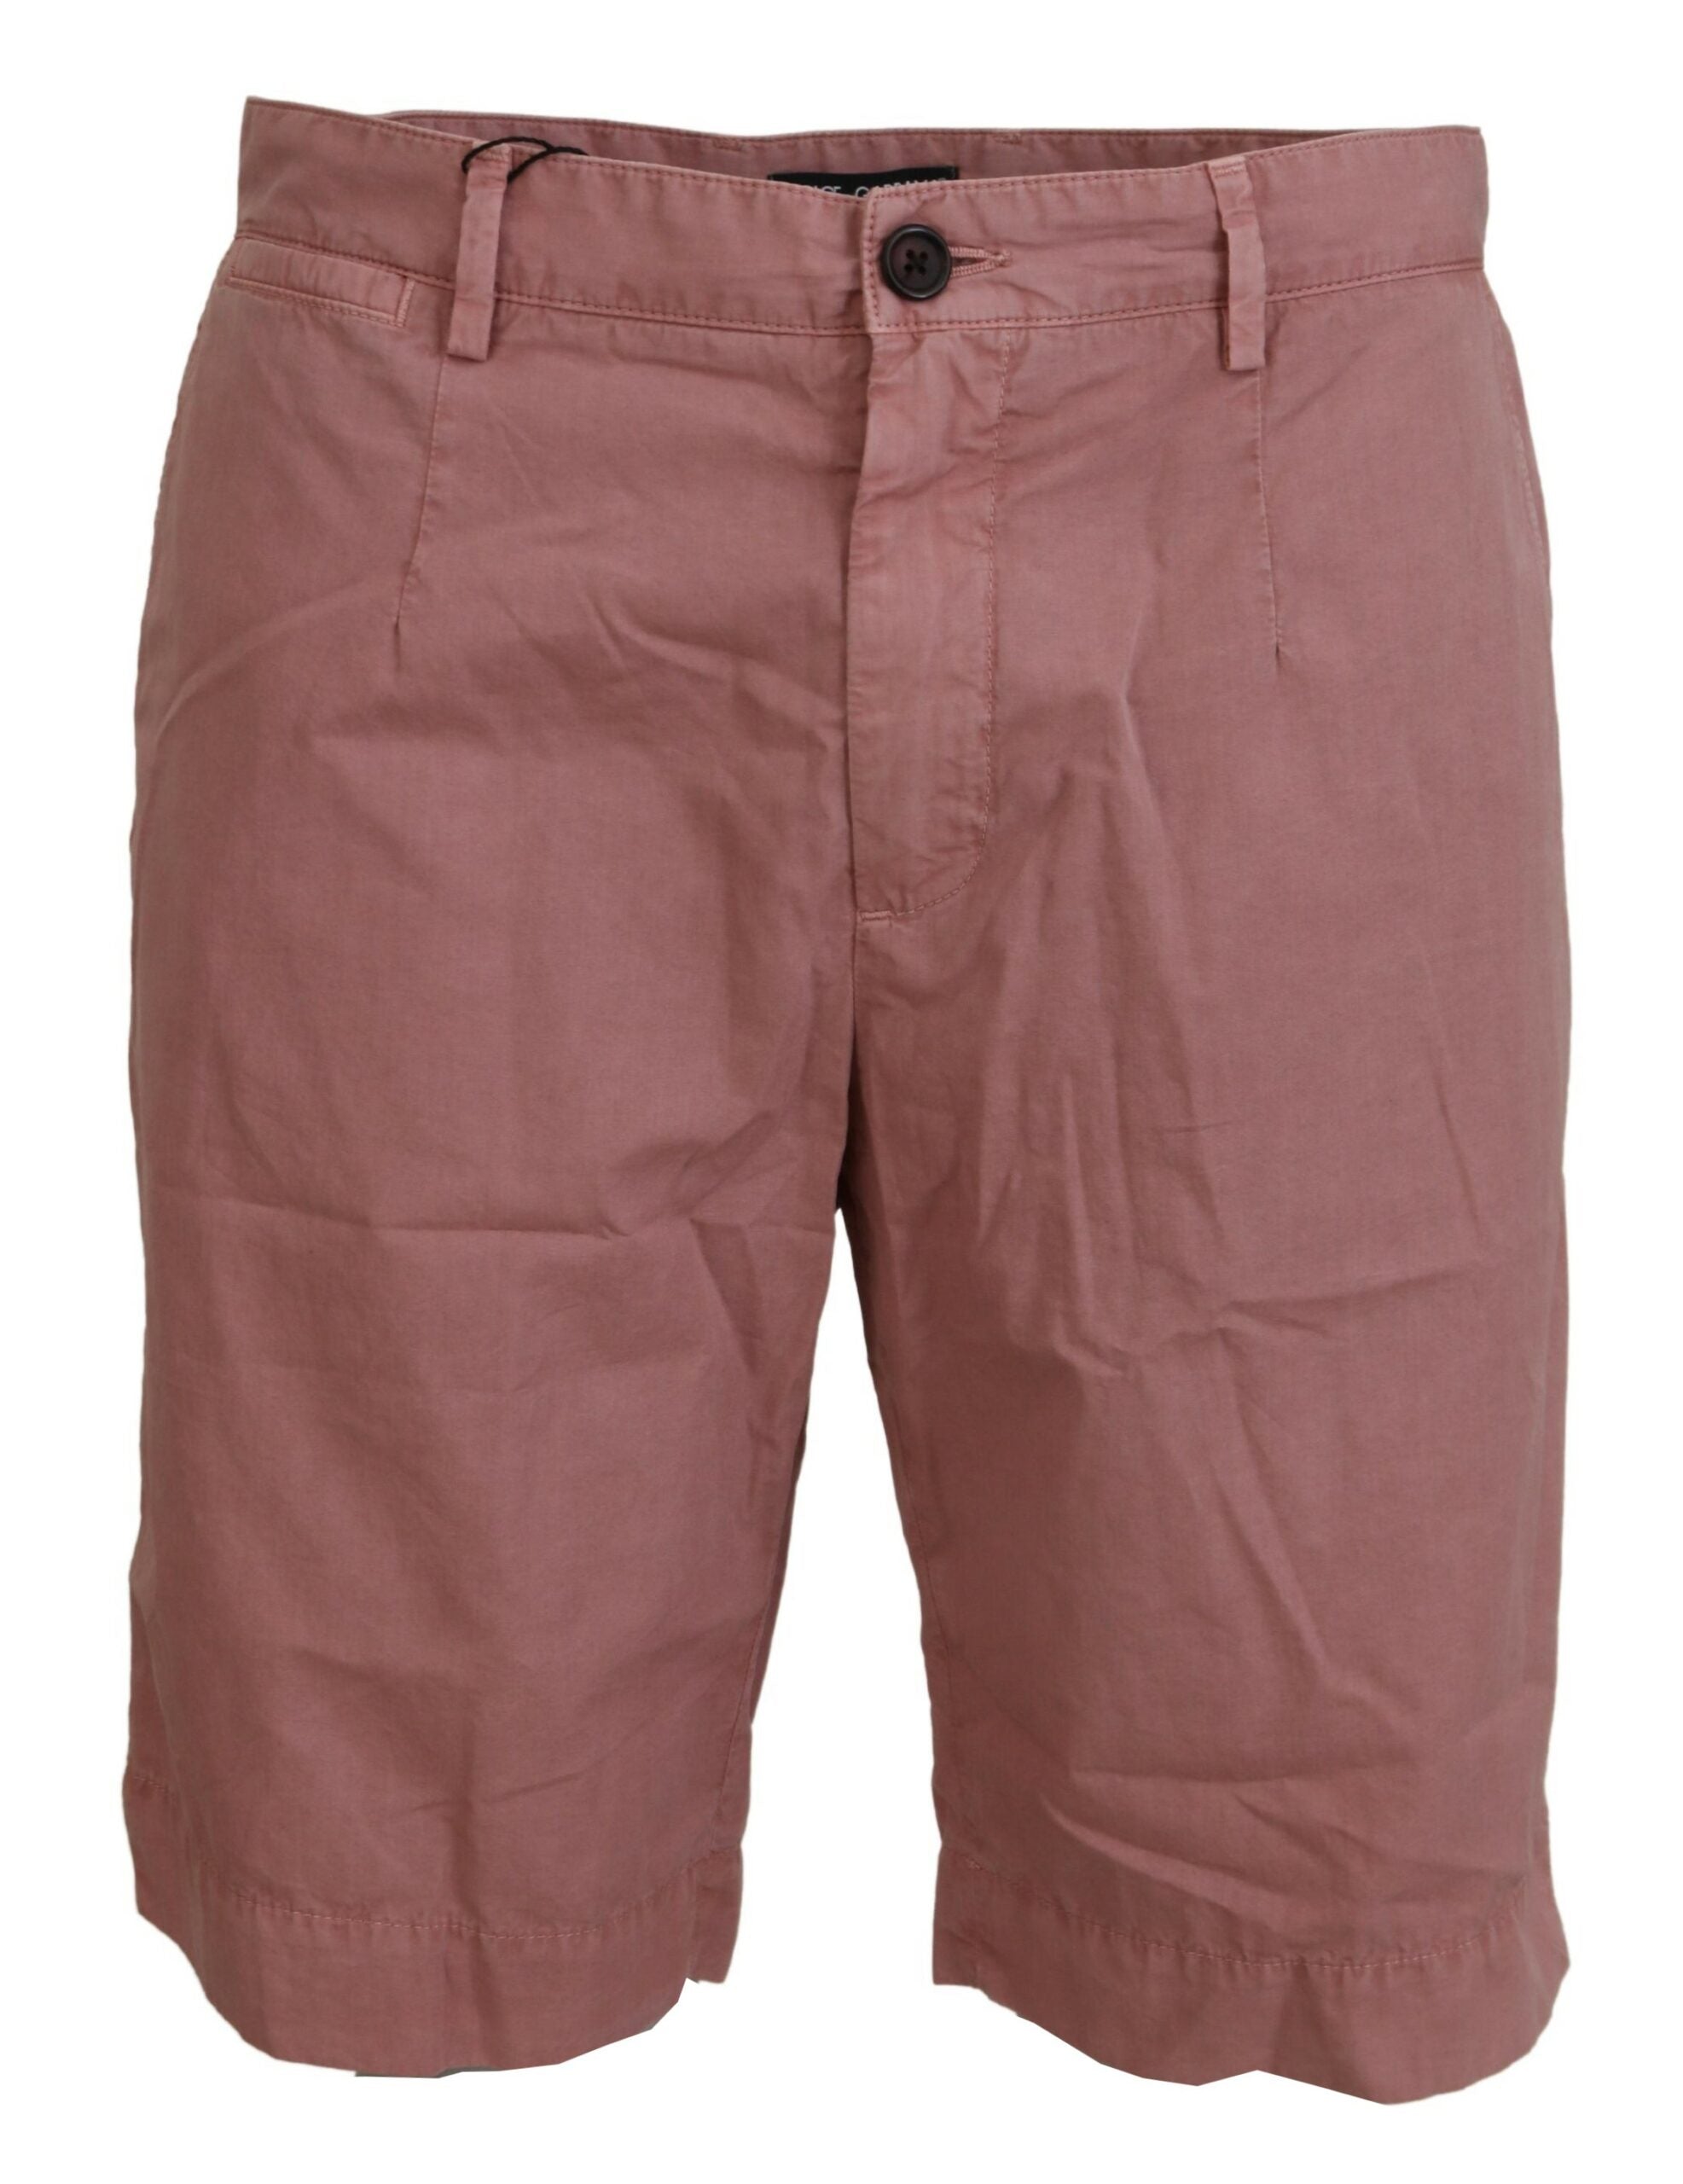 Exquisite Pink Chino Shorts for Men - Divitiae Glamour